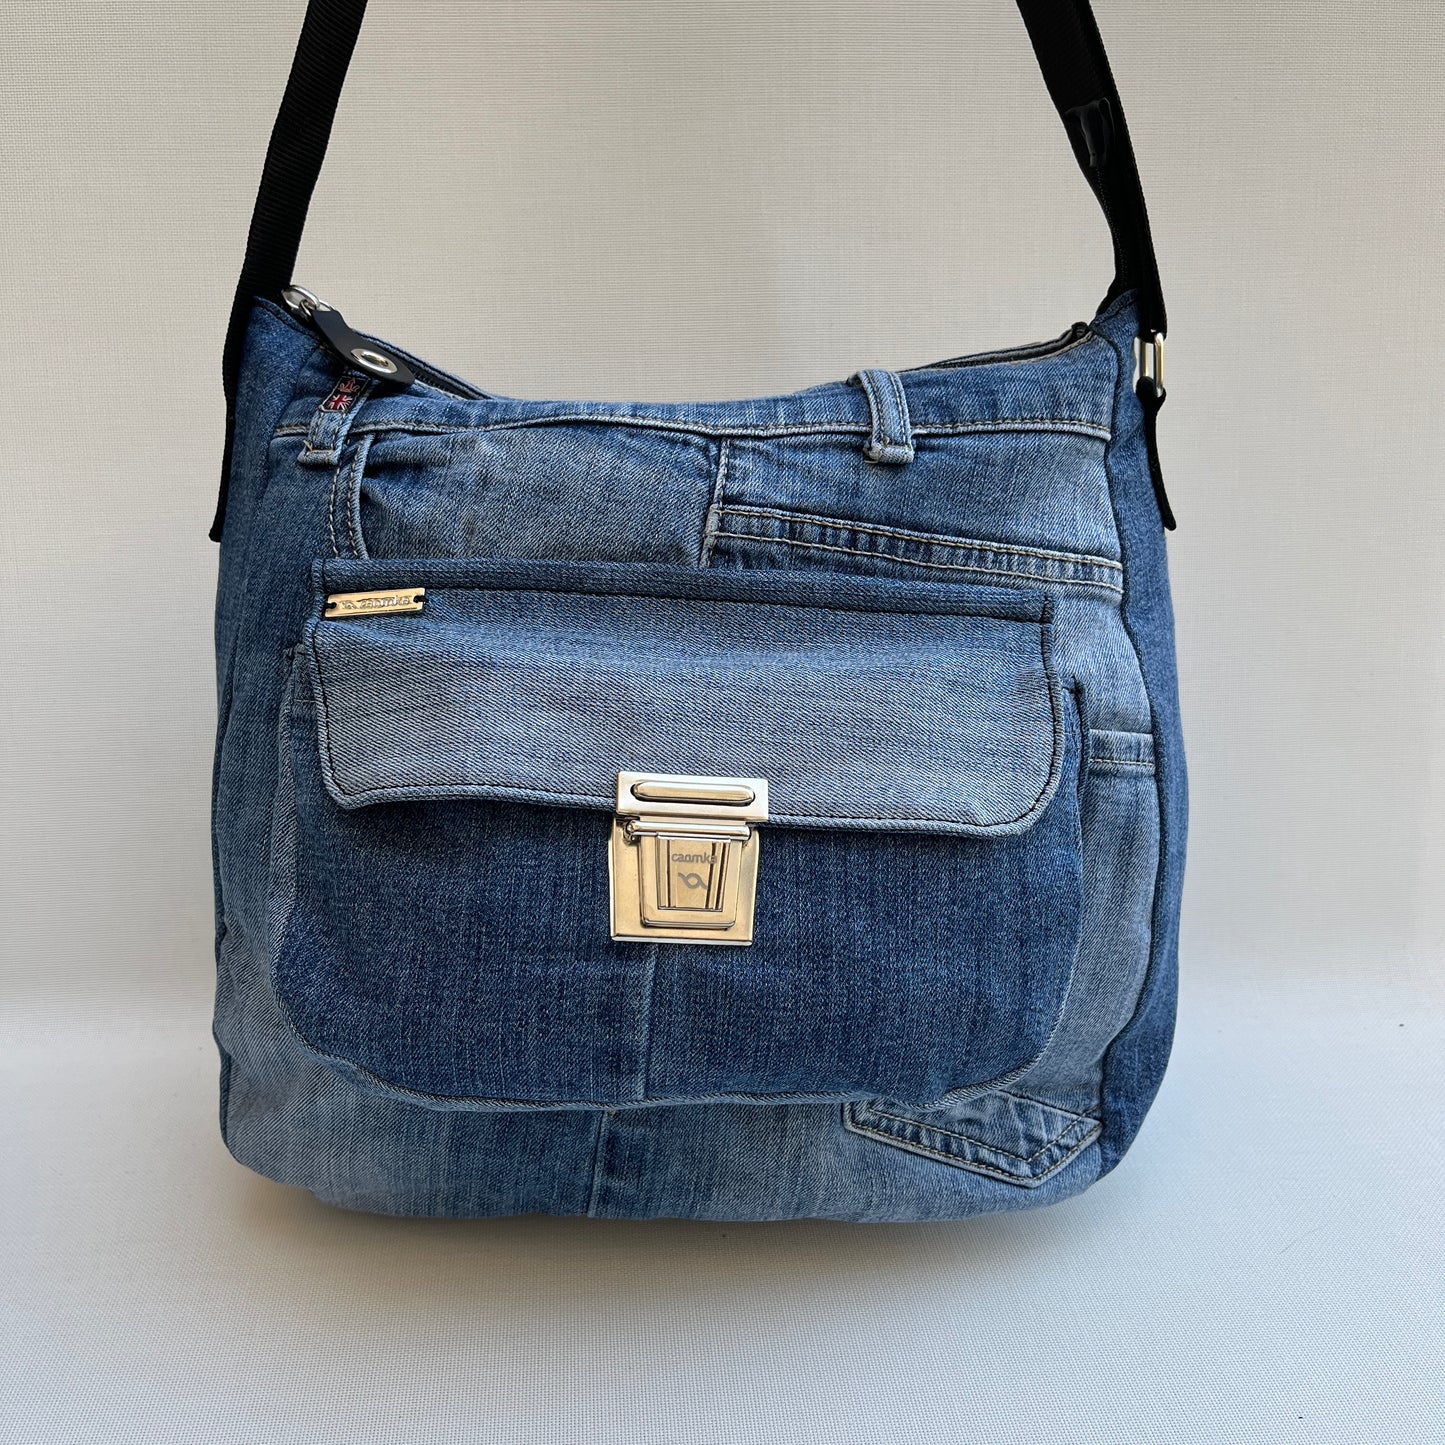 Caomka Tote Bag Special Edition ♻️ Jeans Recycled ♻️ Unikat 11927